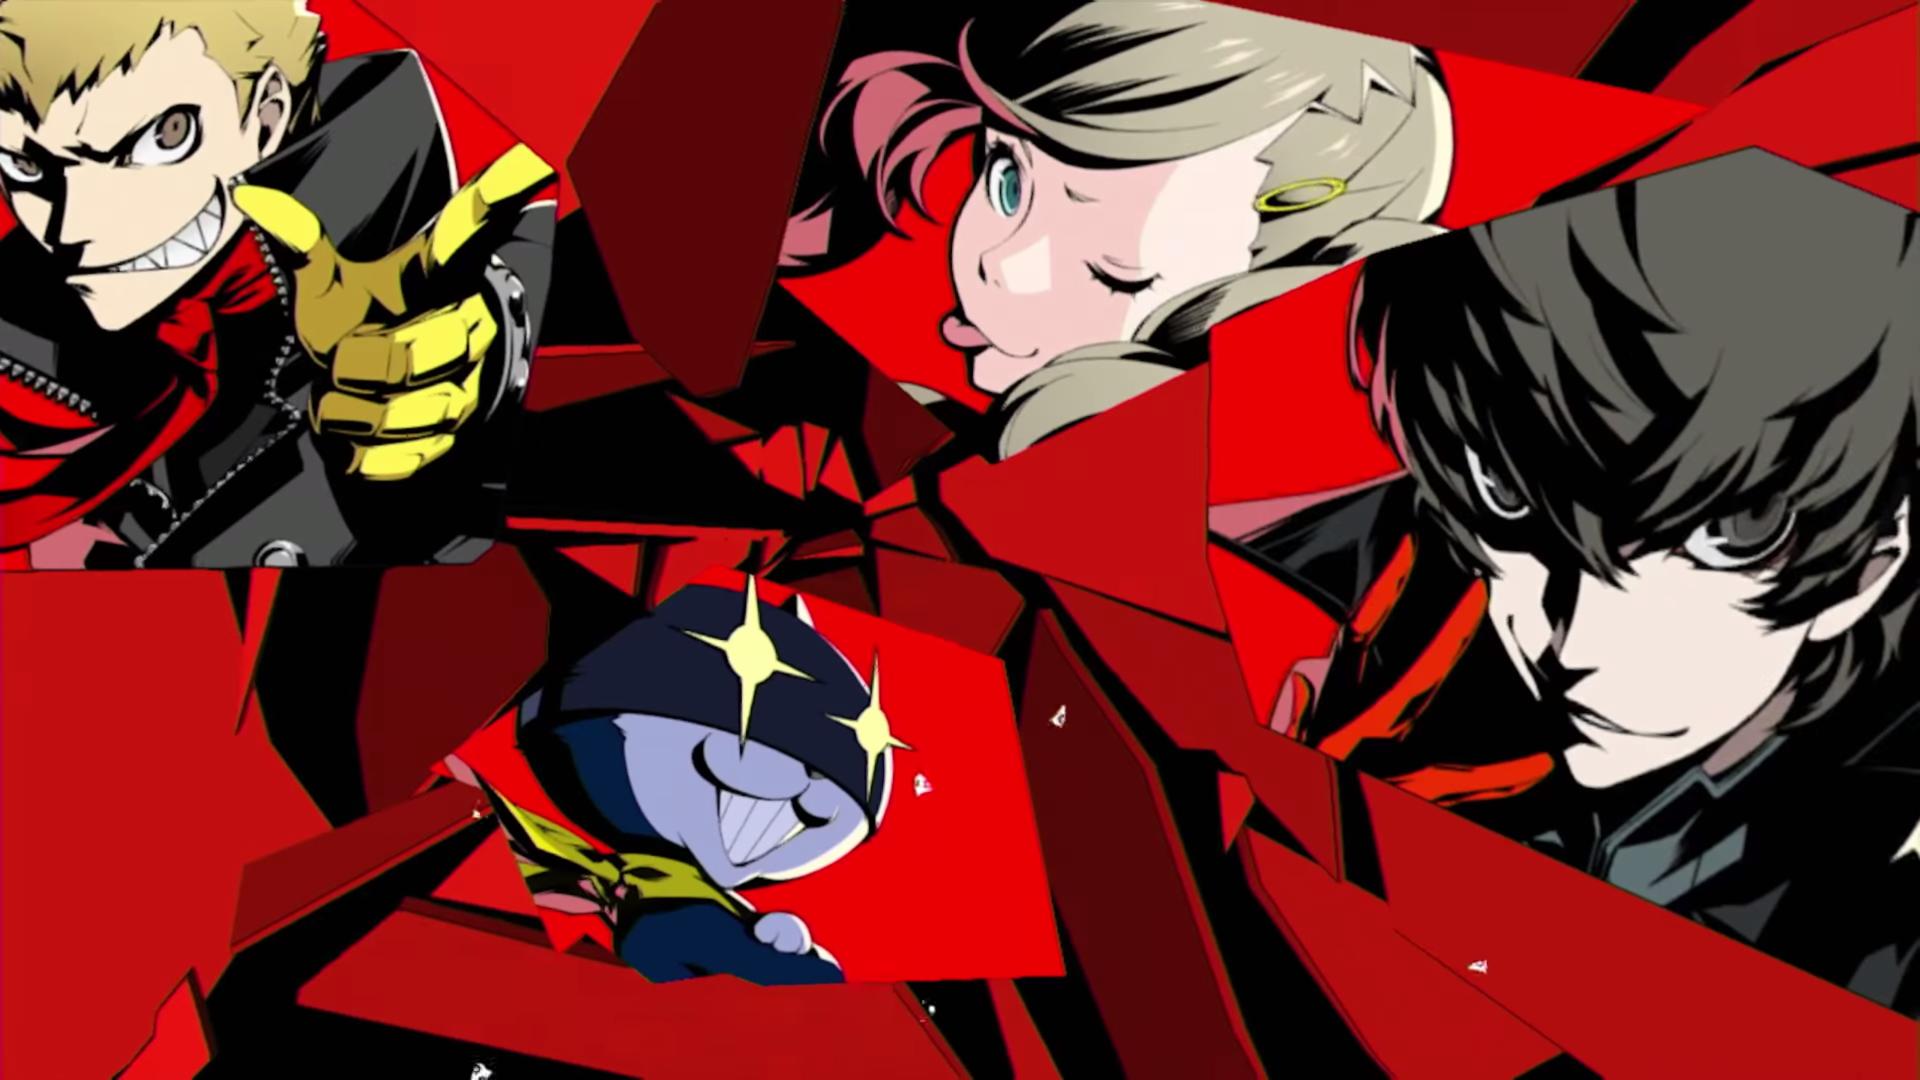 Some Persona 5 Wallpapers